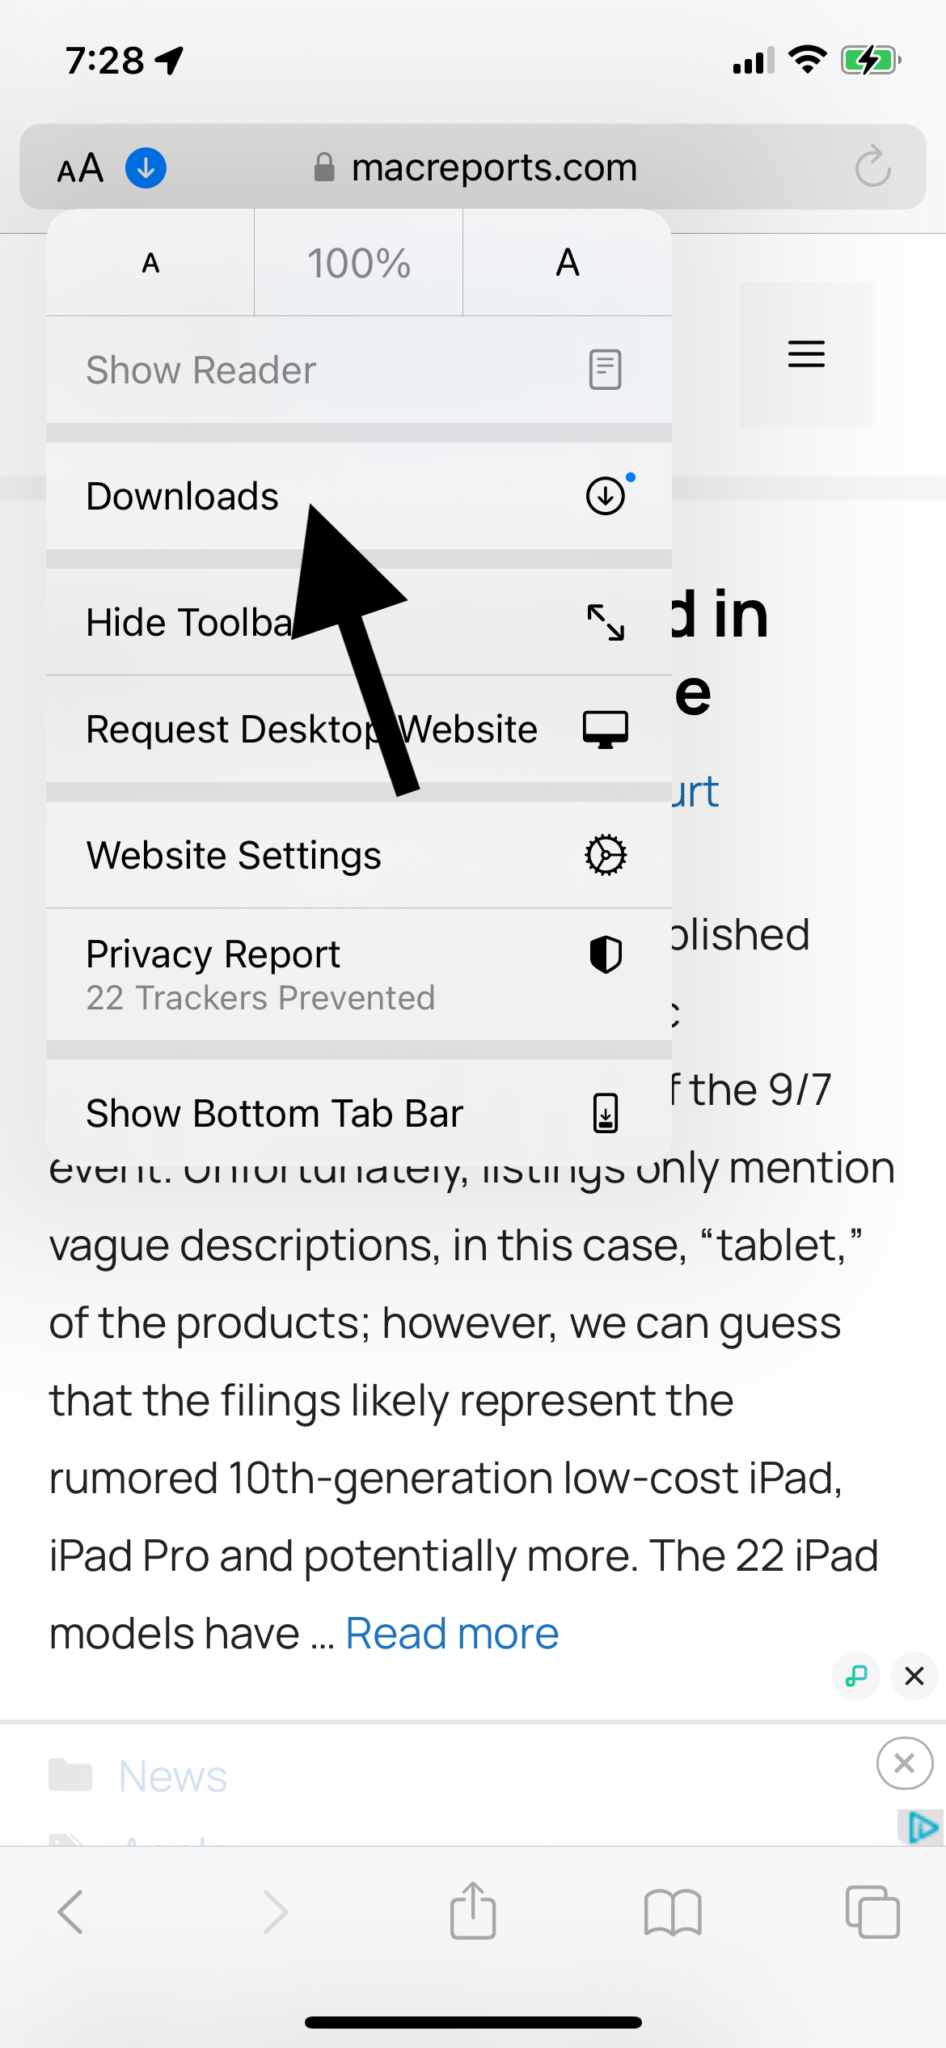 how to view downloads from safari on ipad